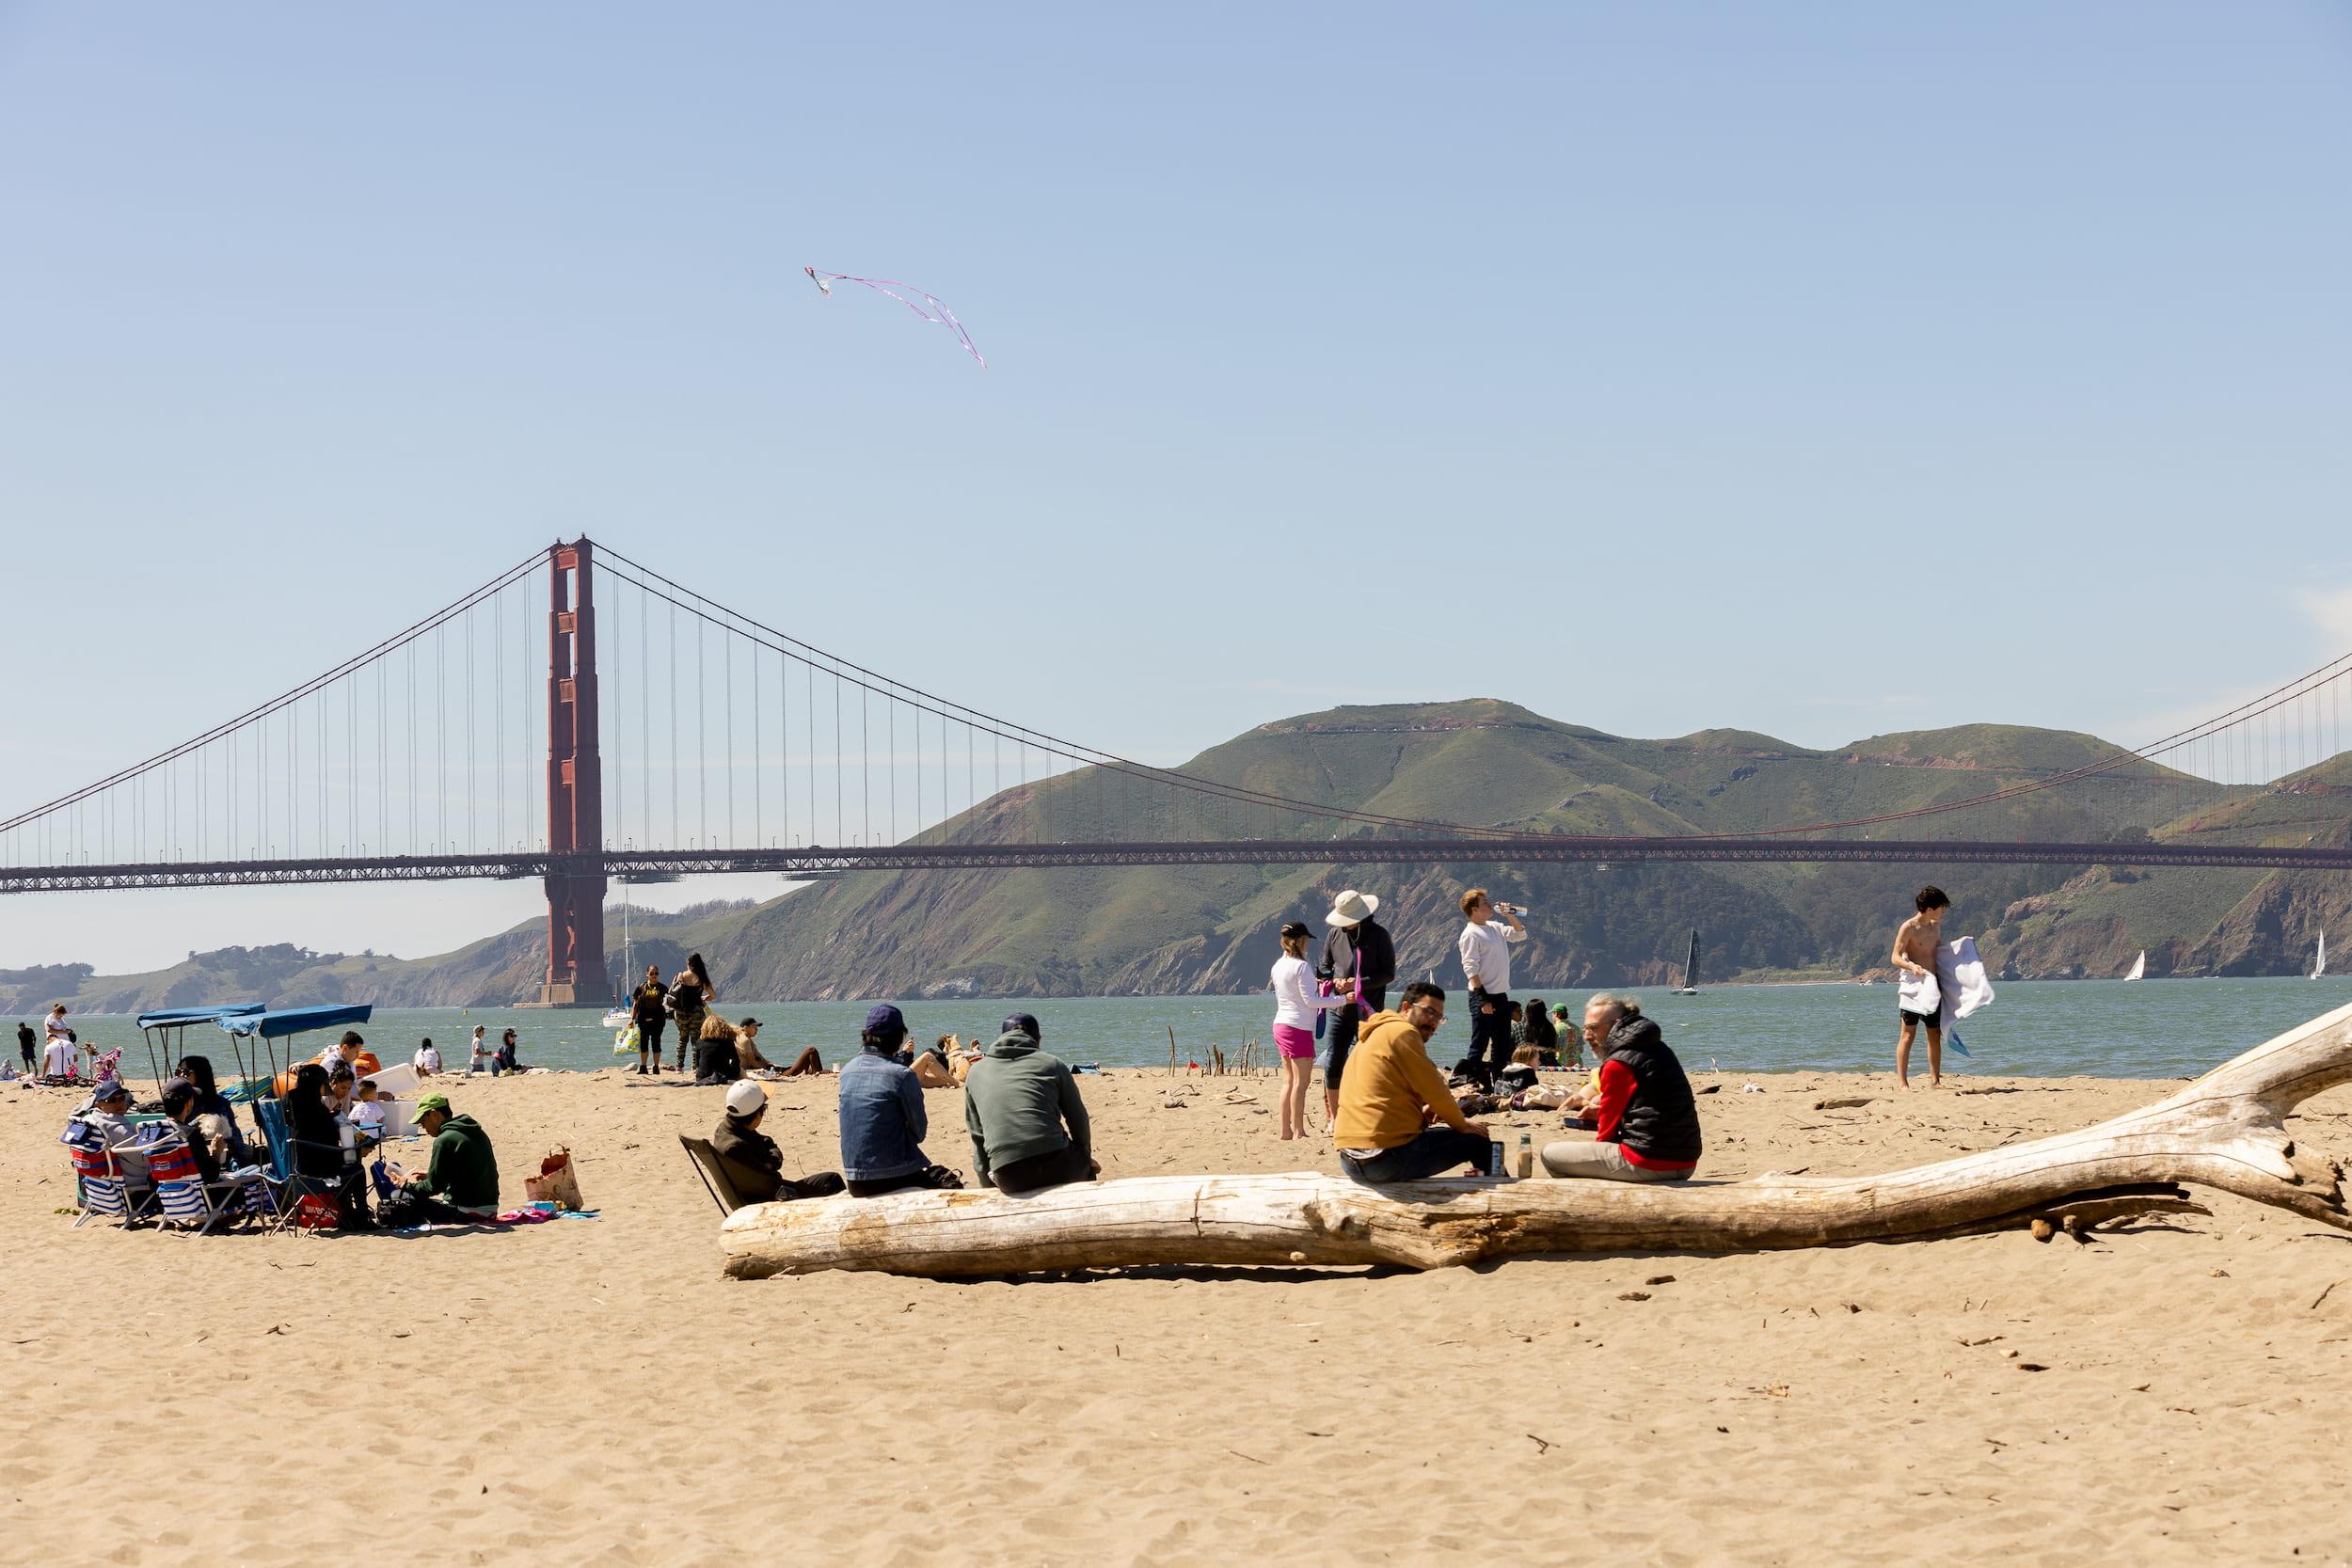 Visitors on the sand at East Beach in the Presidio enjoying the Golden Gate Bridge views.